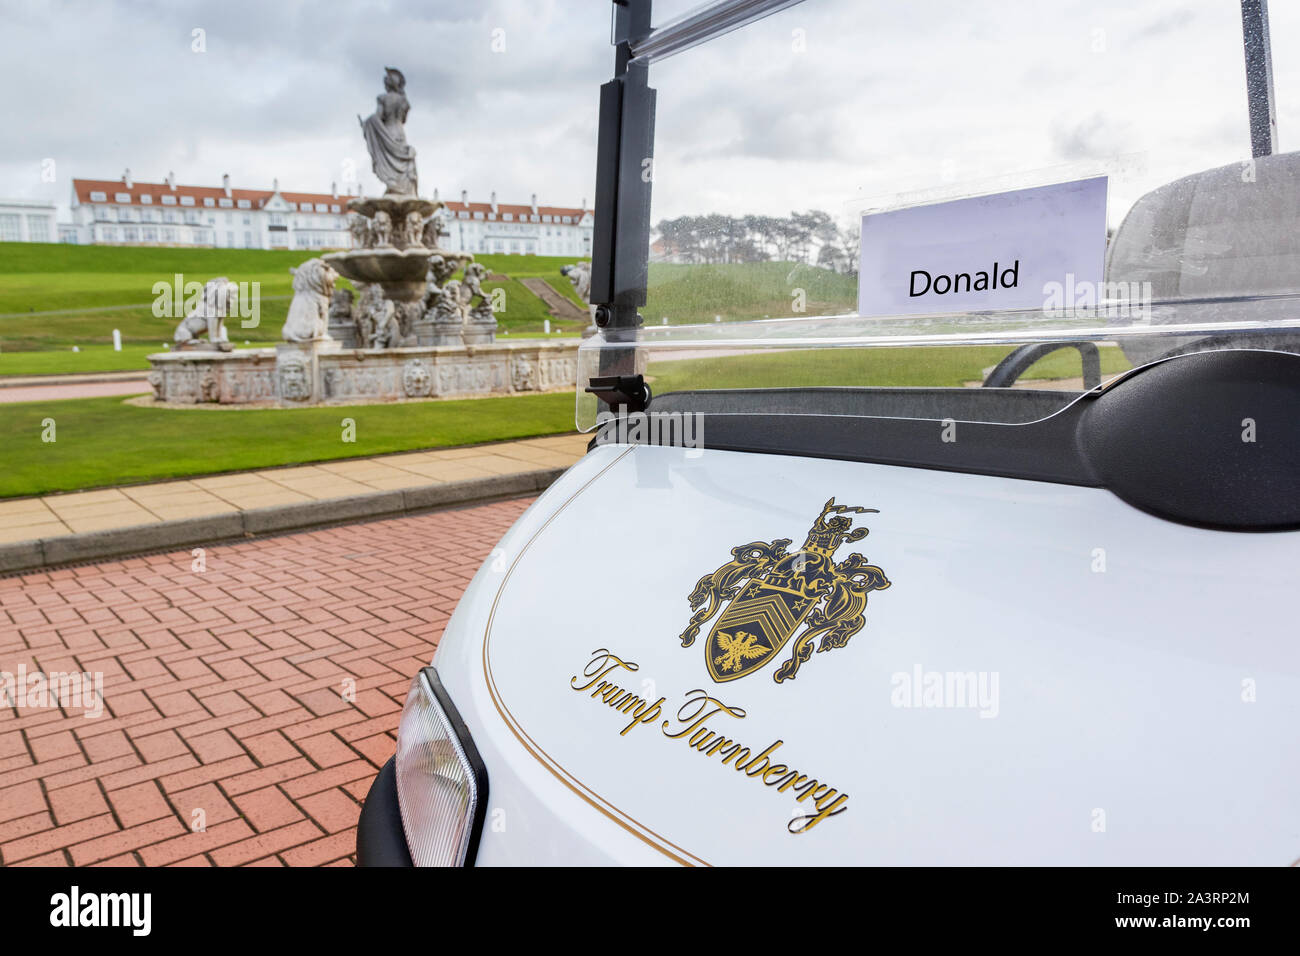 Trump Turnberry embossed golf buggy parked outside the clubhouse at Trump Turnberry Hotel and golf resort, Turnberry, Ayrshire, Scotland, UK Stock Photo